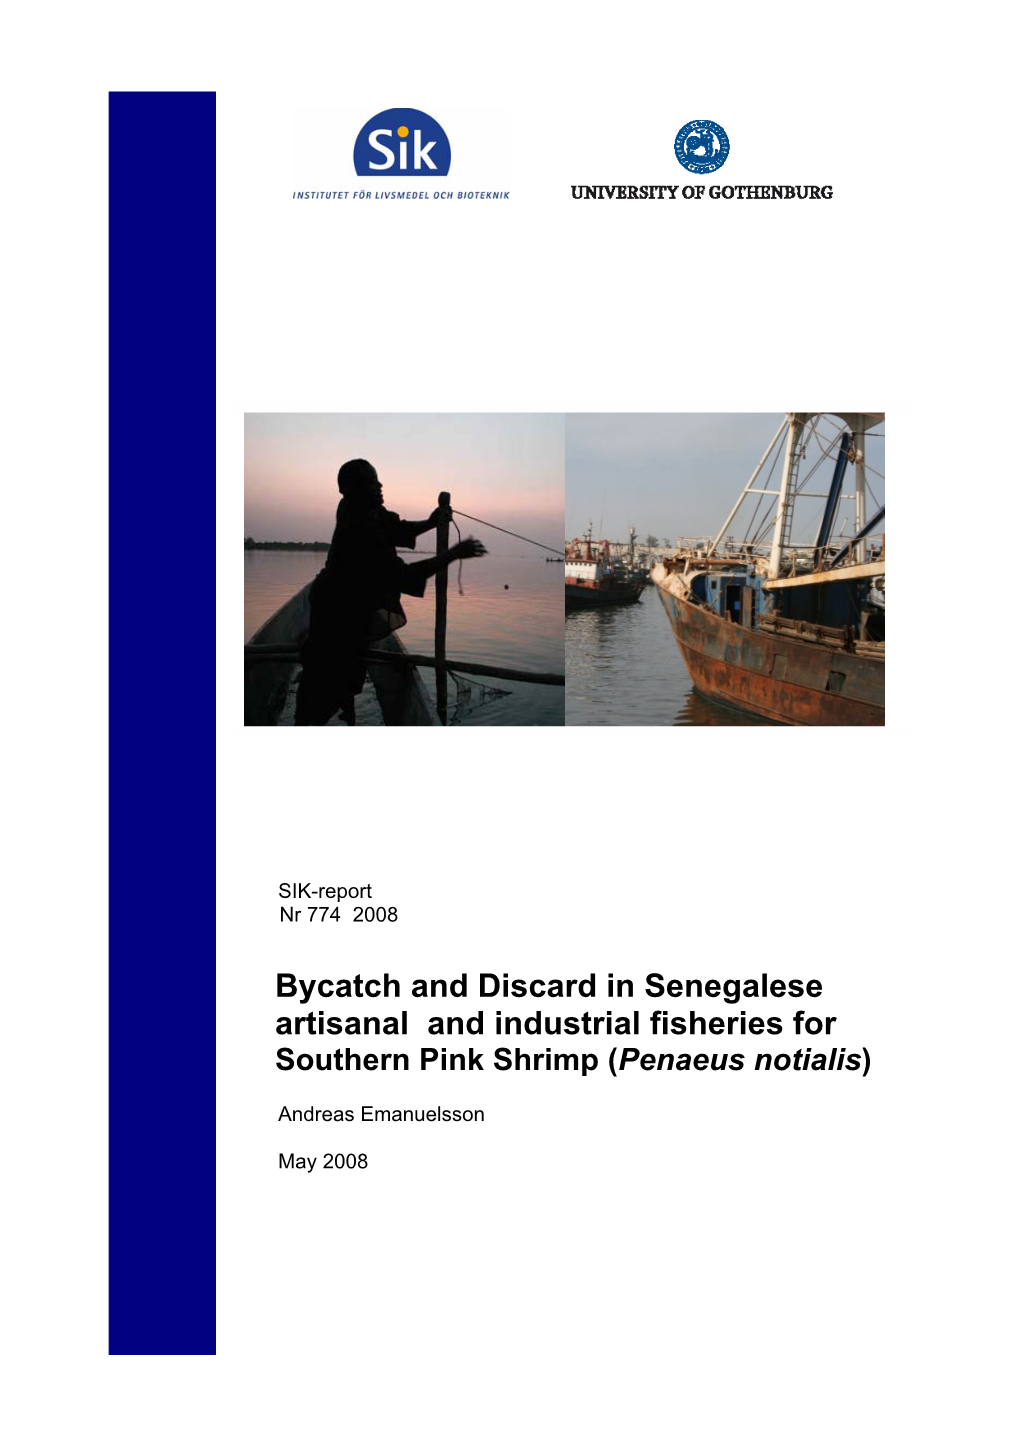 Bycatch and Discard in Senegalese Artisanal and Industrial Fisheries for Southern Pink Shrimp (Penaeus Notialis)